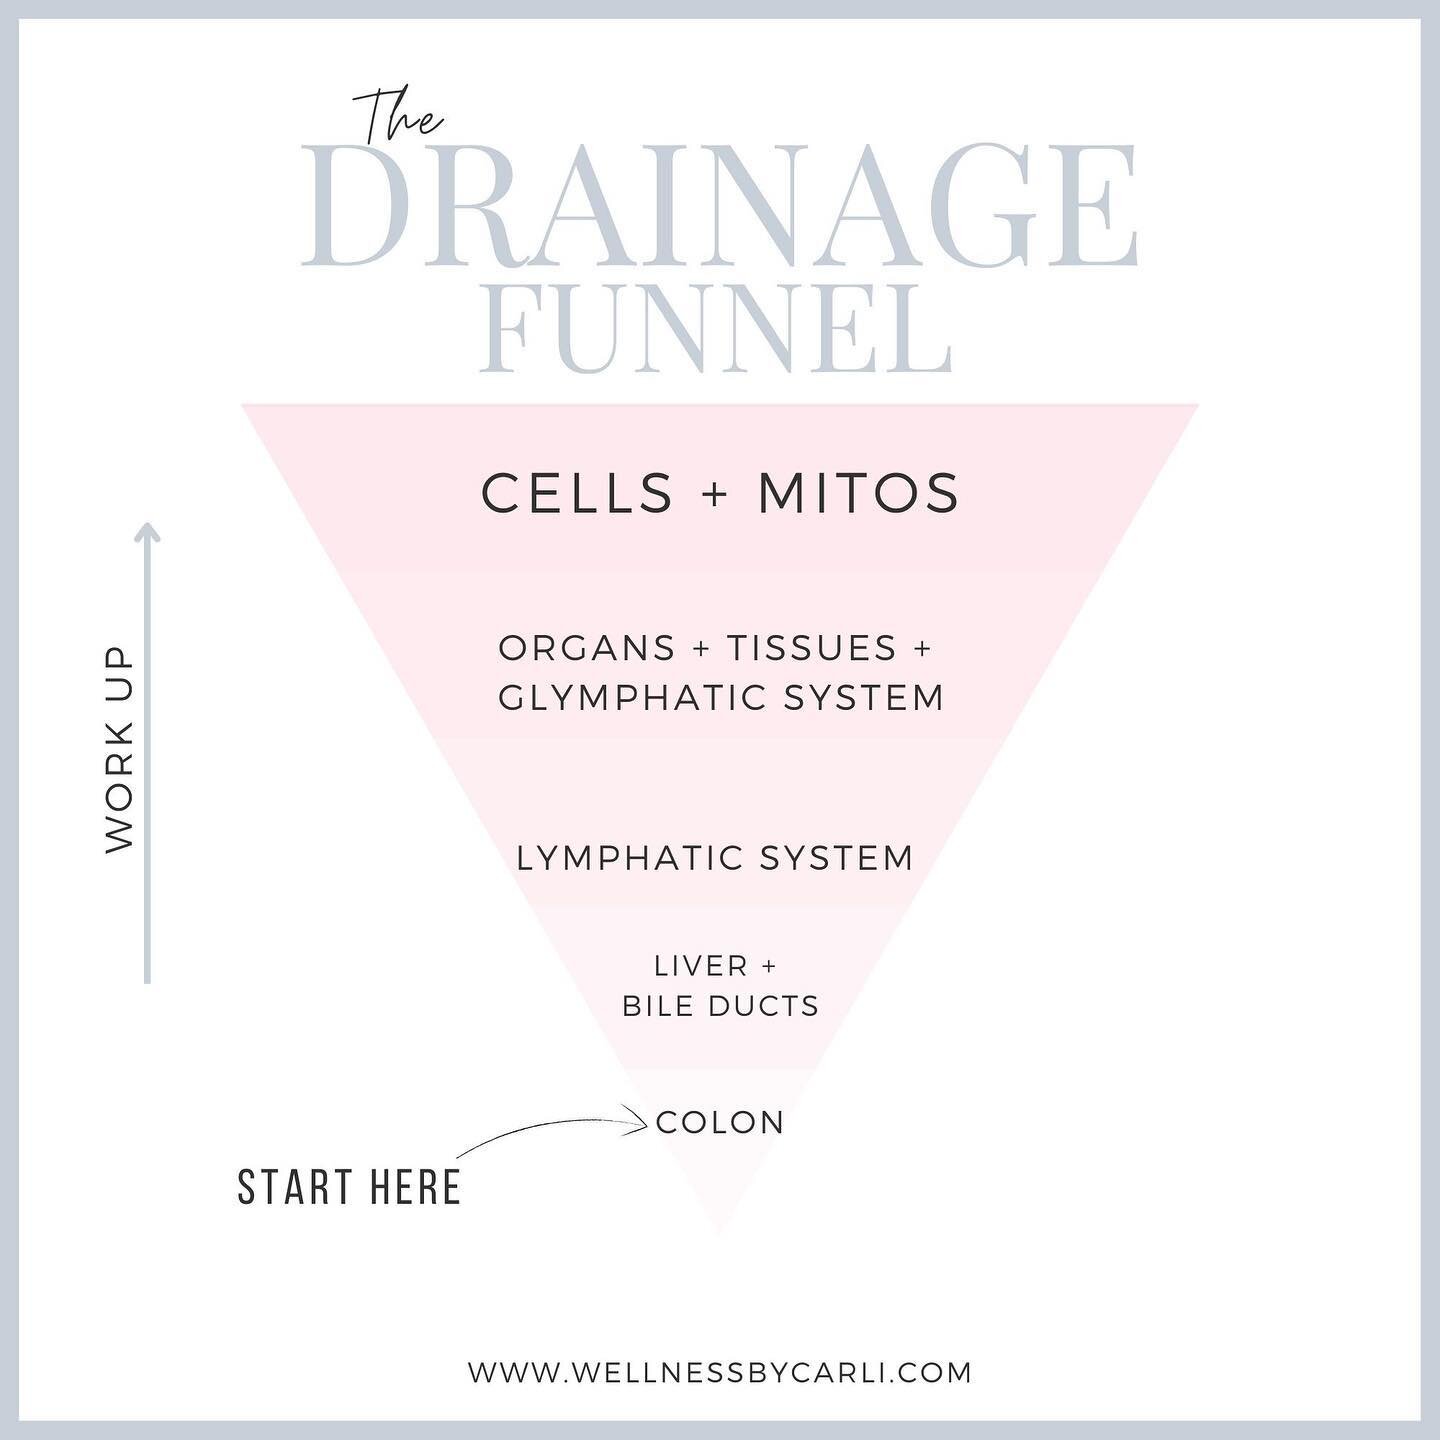 One of the biggest lessons I have learned in functional health is that we ALL have some cleaning up to do, but if you don't address drainage BEFORE a cleanse or detox...your health will get worse, not better. 

〰️What is the drainage funnel?
It is th